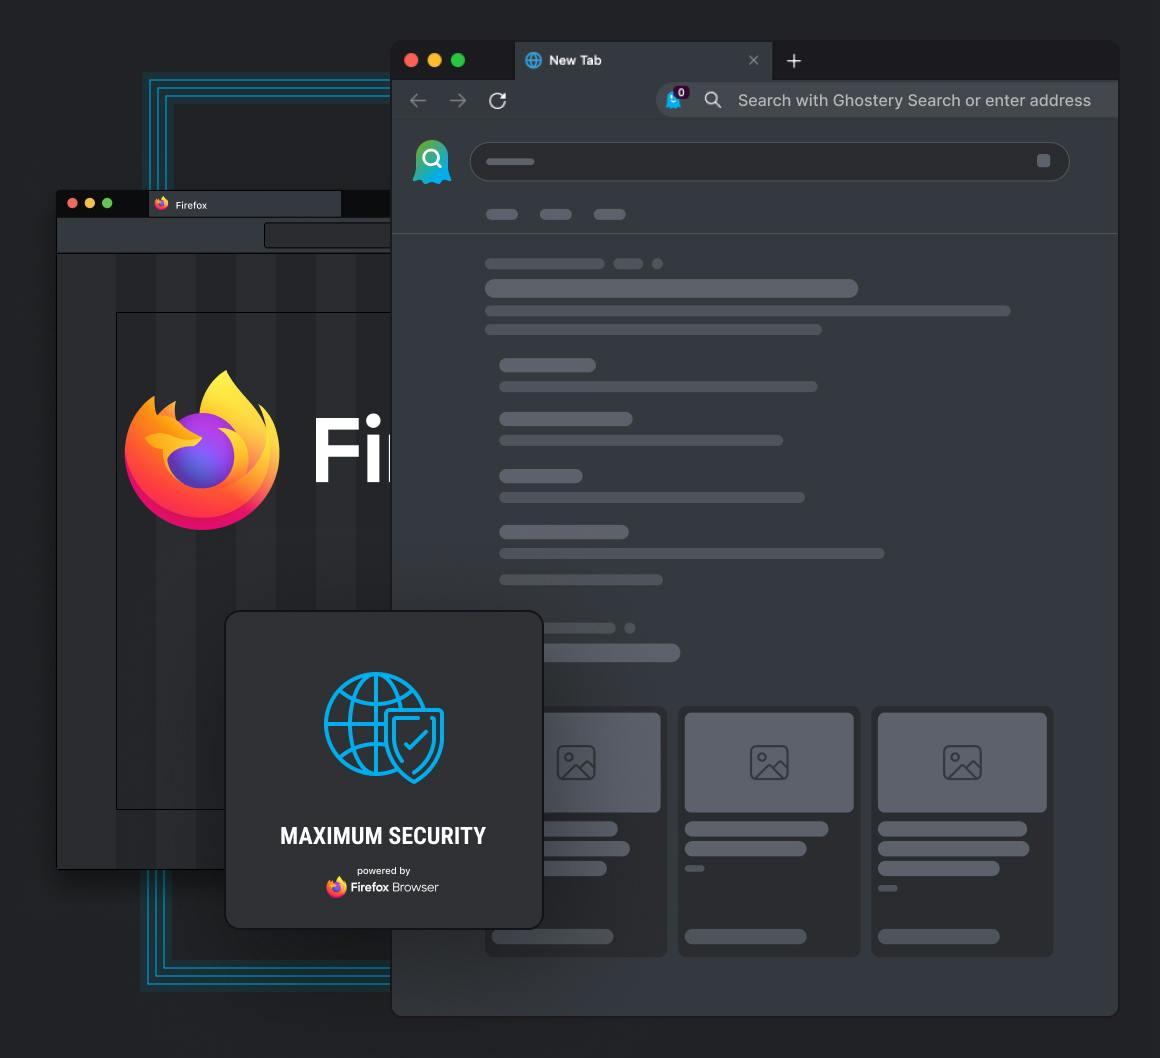 Ghostery Private Browser builds on top of Firefox browser supercharging it's default privacy and security features - Desktop view